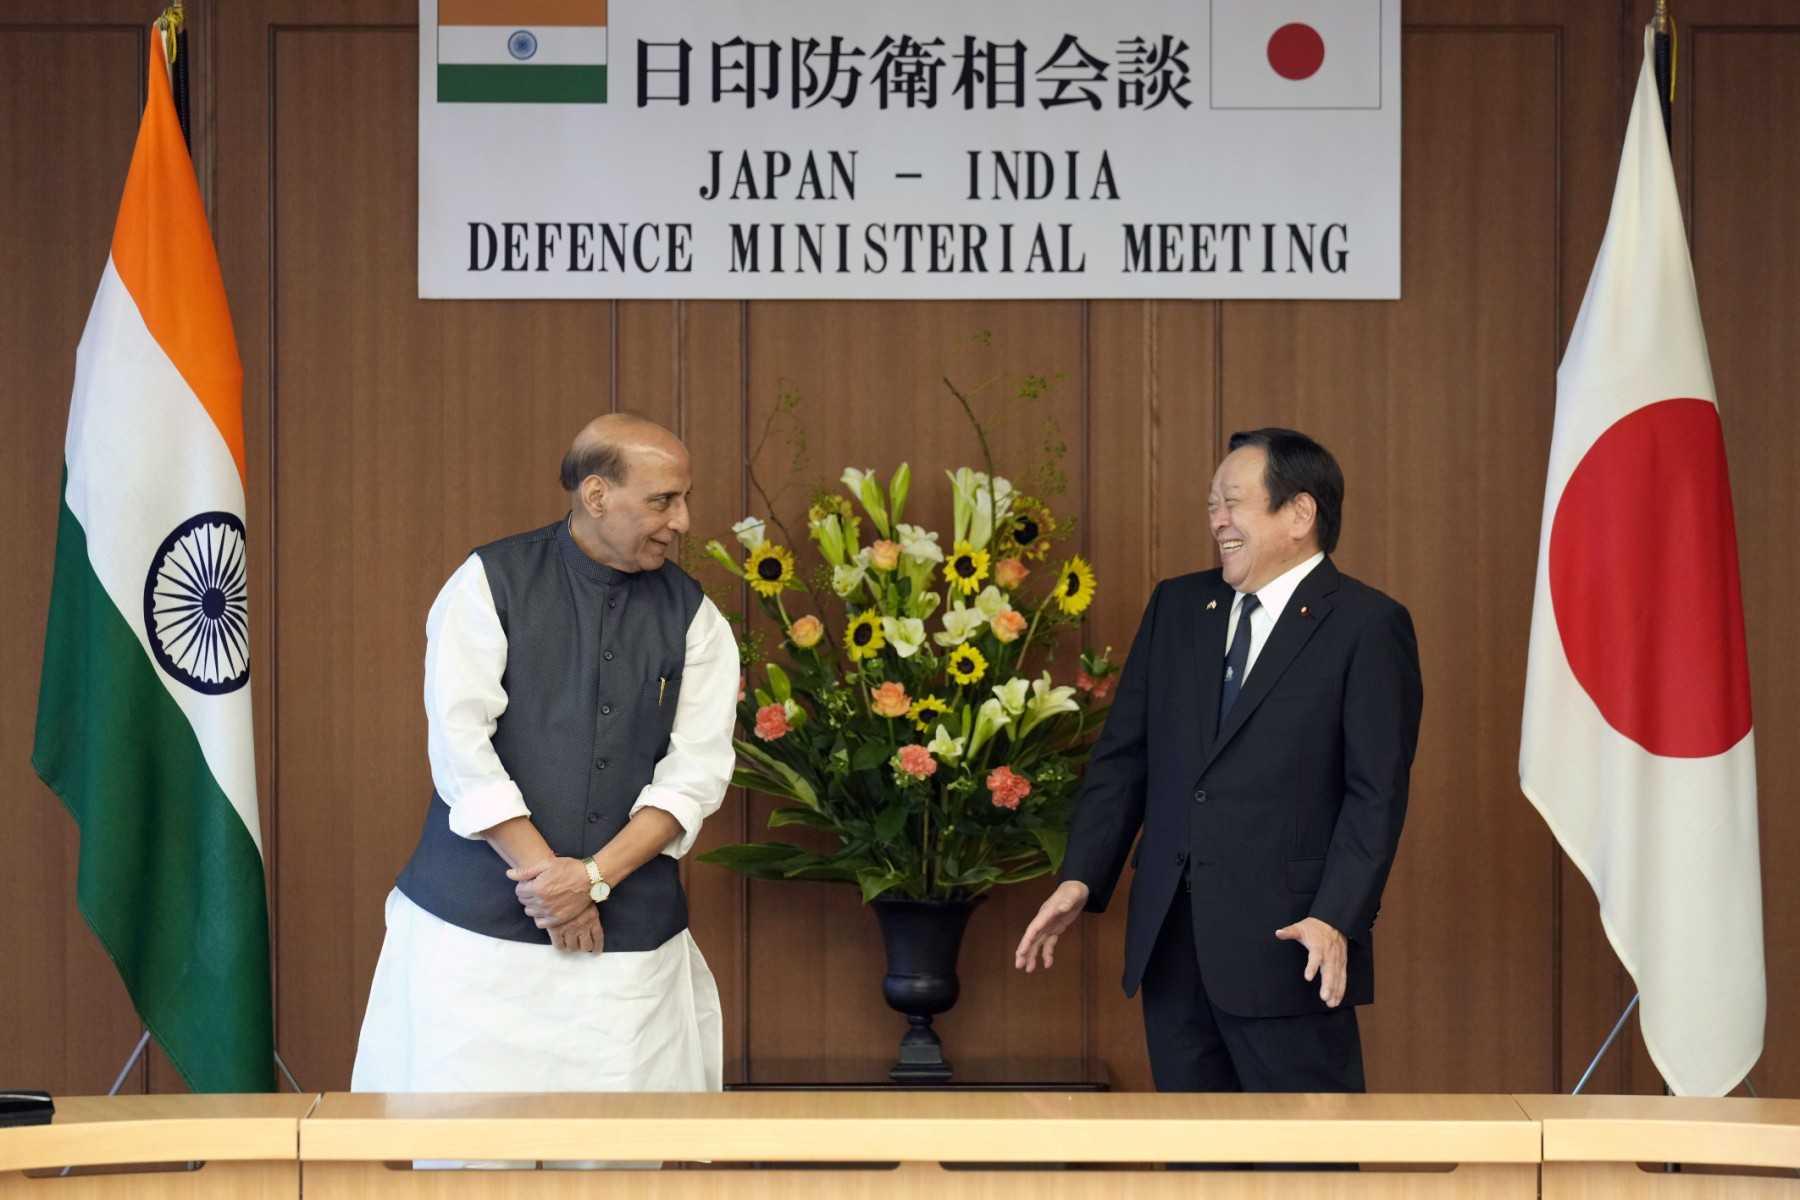 India’s Defence Minister Rajnath Singh (left) and Japan's Defence Minister Yasukazu Hamada pose for photos before a meeting in Tokyo on Sept 8. Photo: AFP